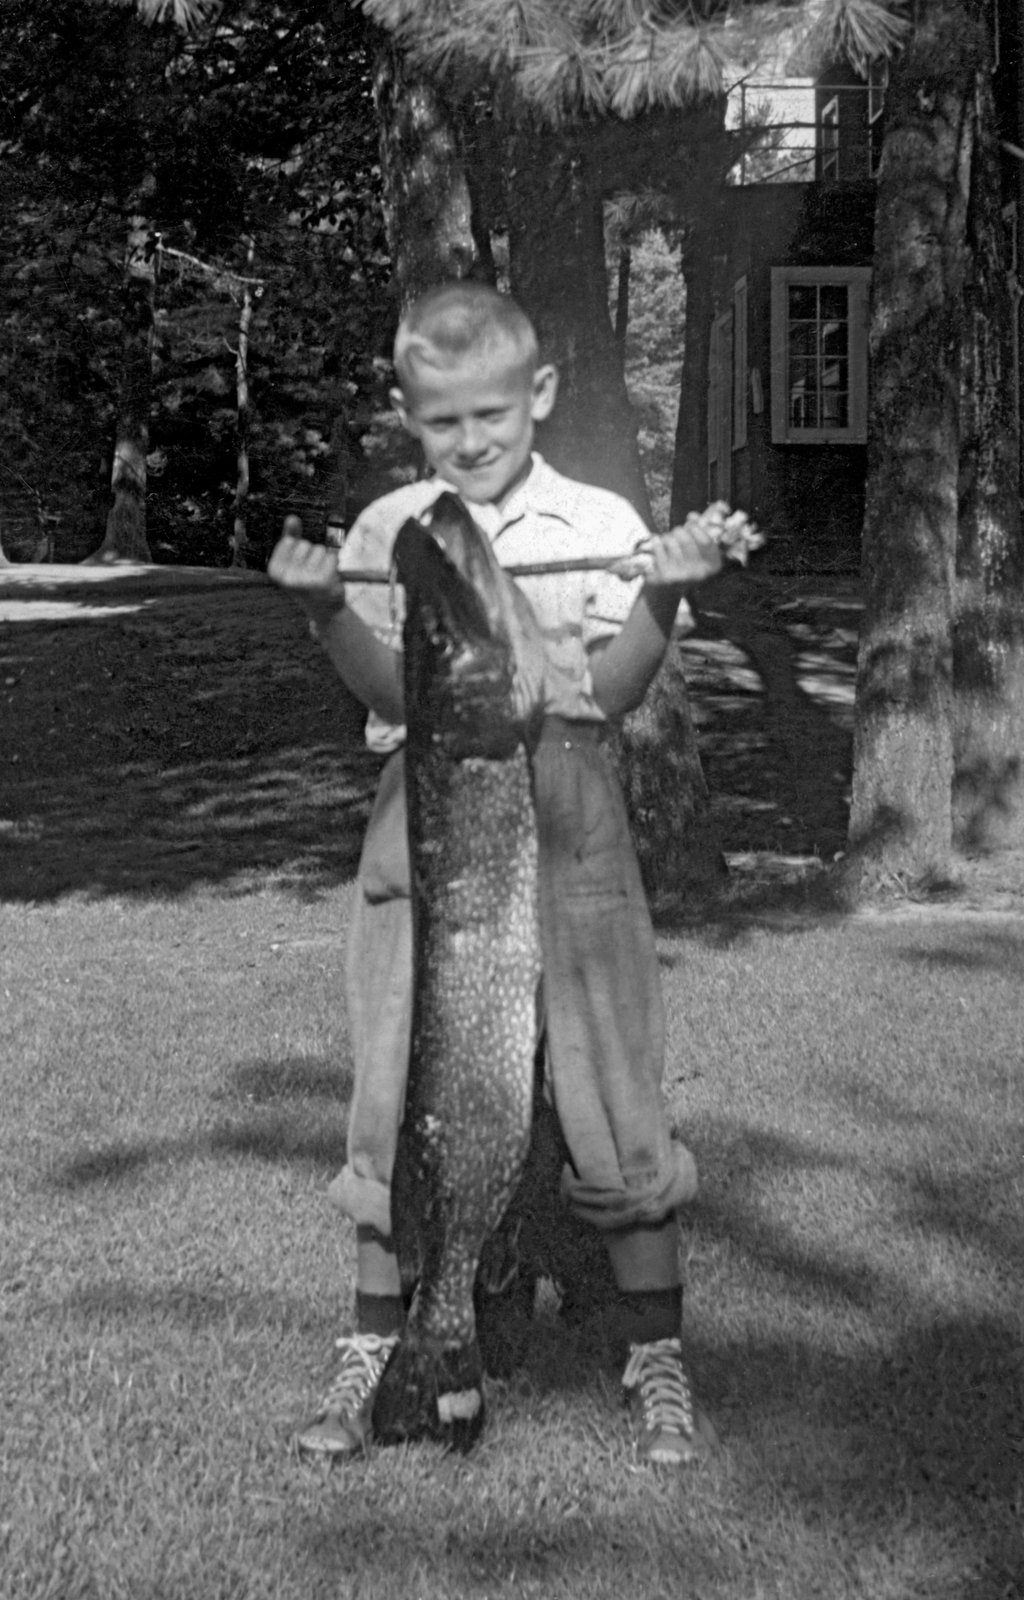 Peter Shea with the 15-pound muskie that he proudly caught in the Ottawa River, Bristol, Quebec, c. 1952.